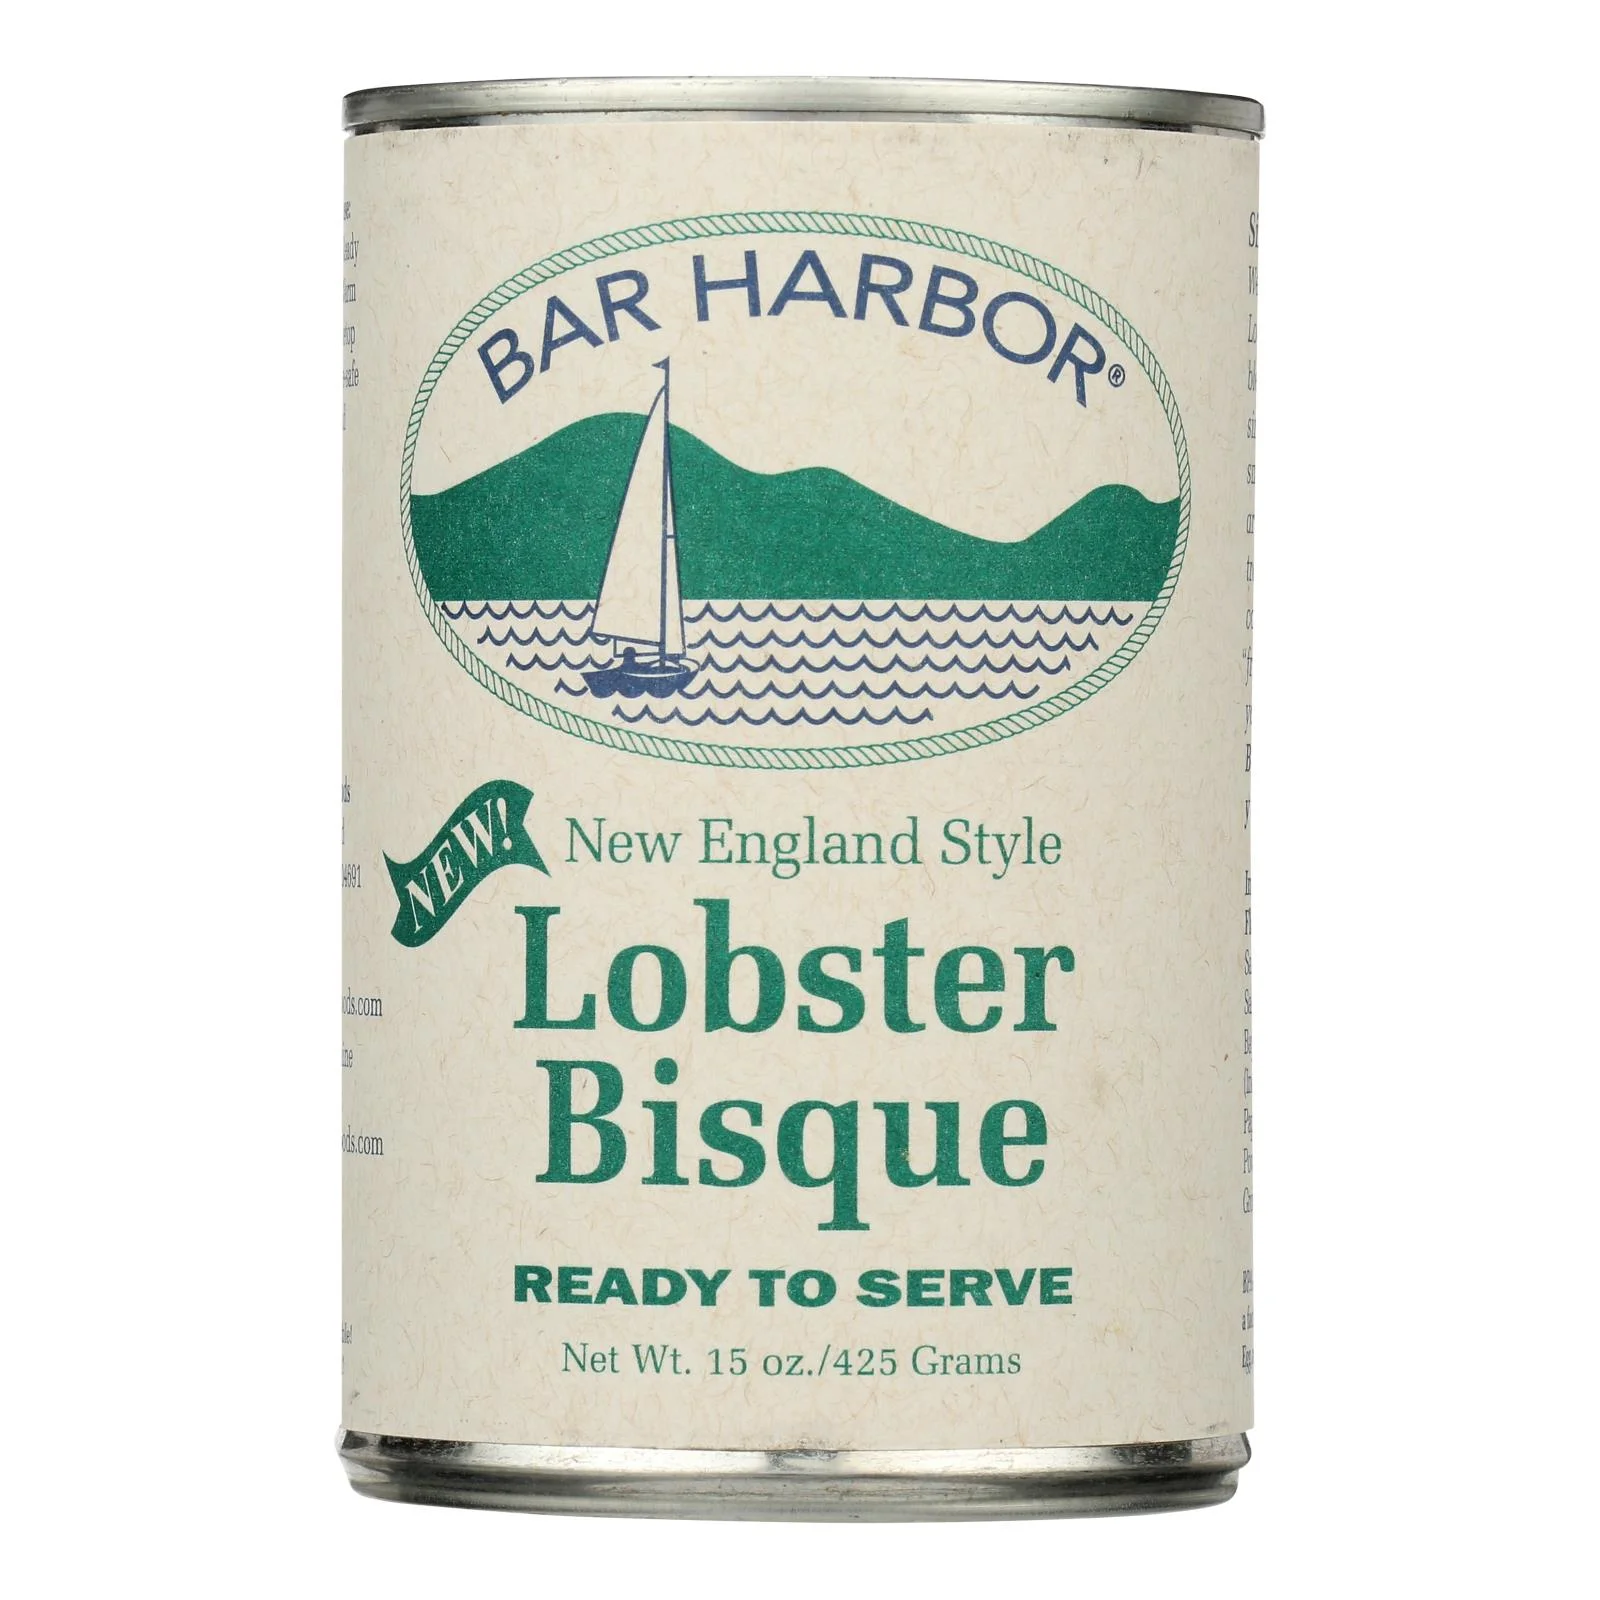 Bar Harbor Lobster Bisque Soup, Ready to Serve 15 oz Can, 6 Case - $40.99